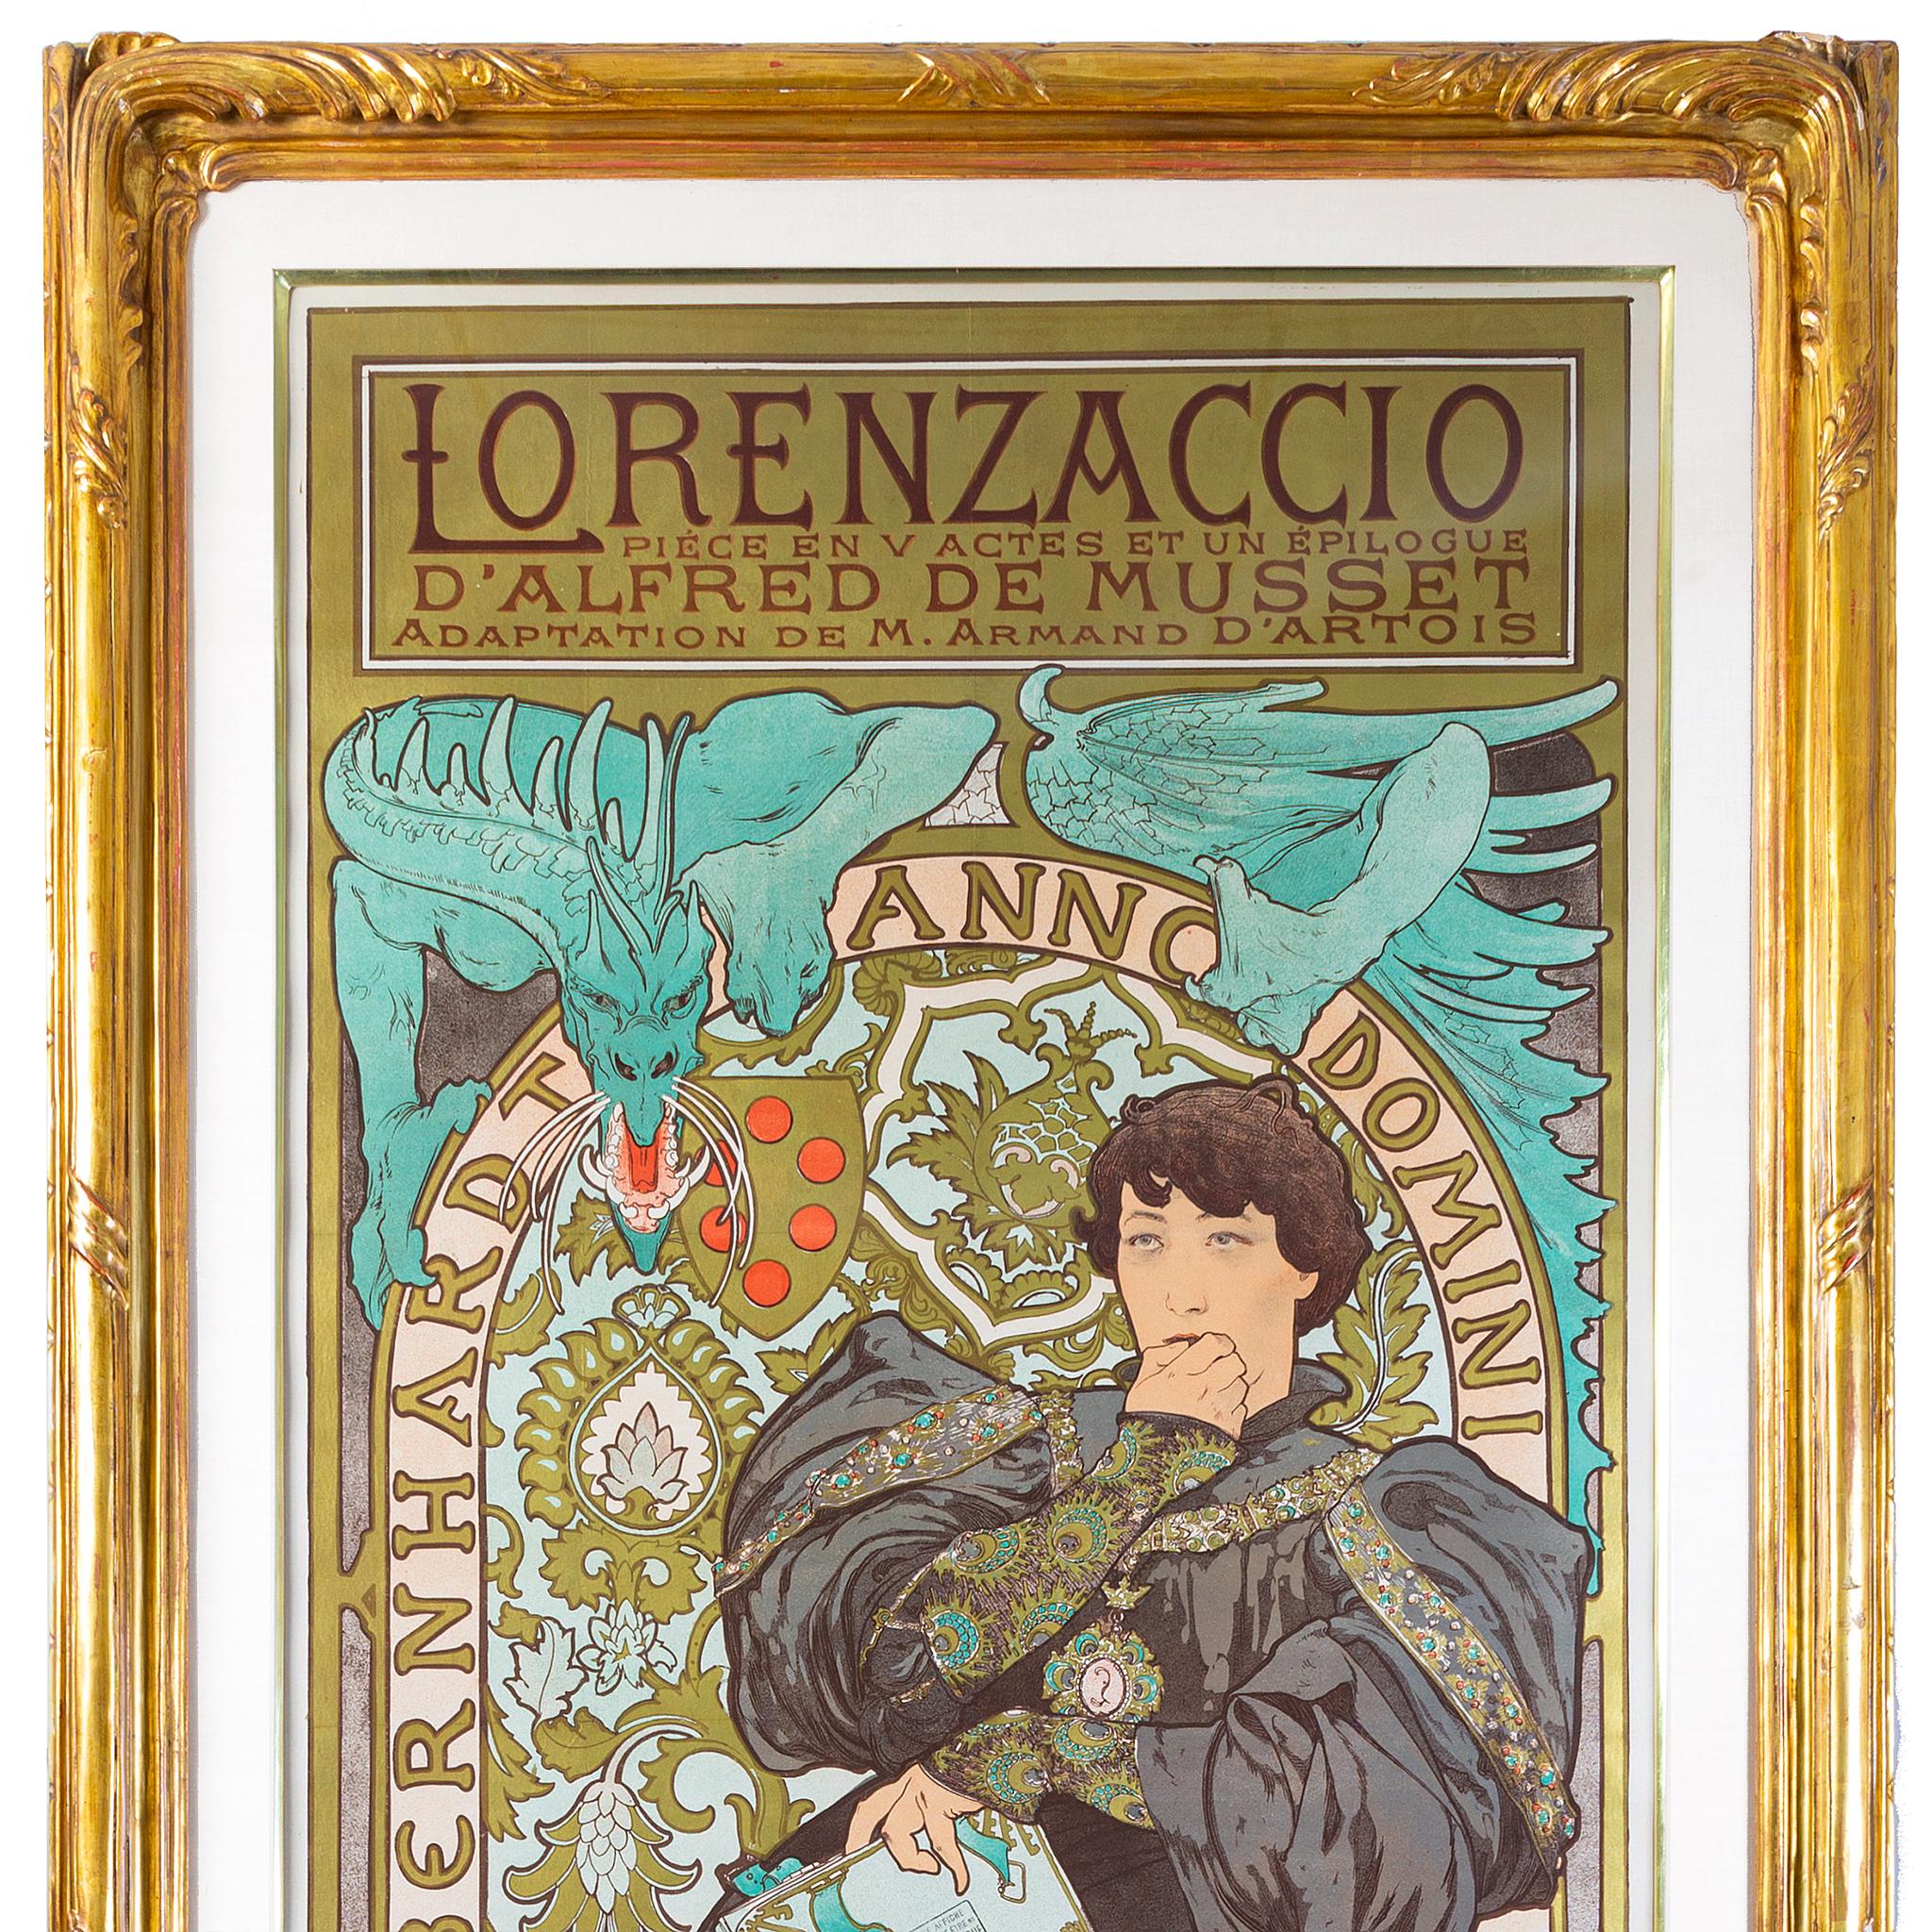 This stunning theater poster was designed by the designer Alphonse Mucha for the play 